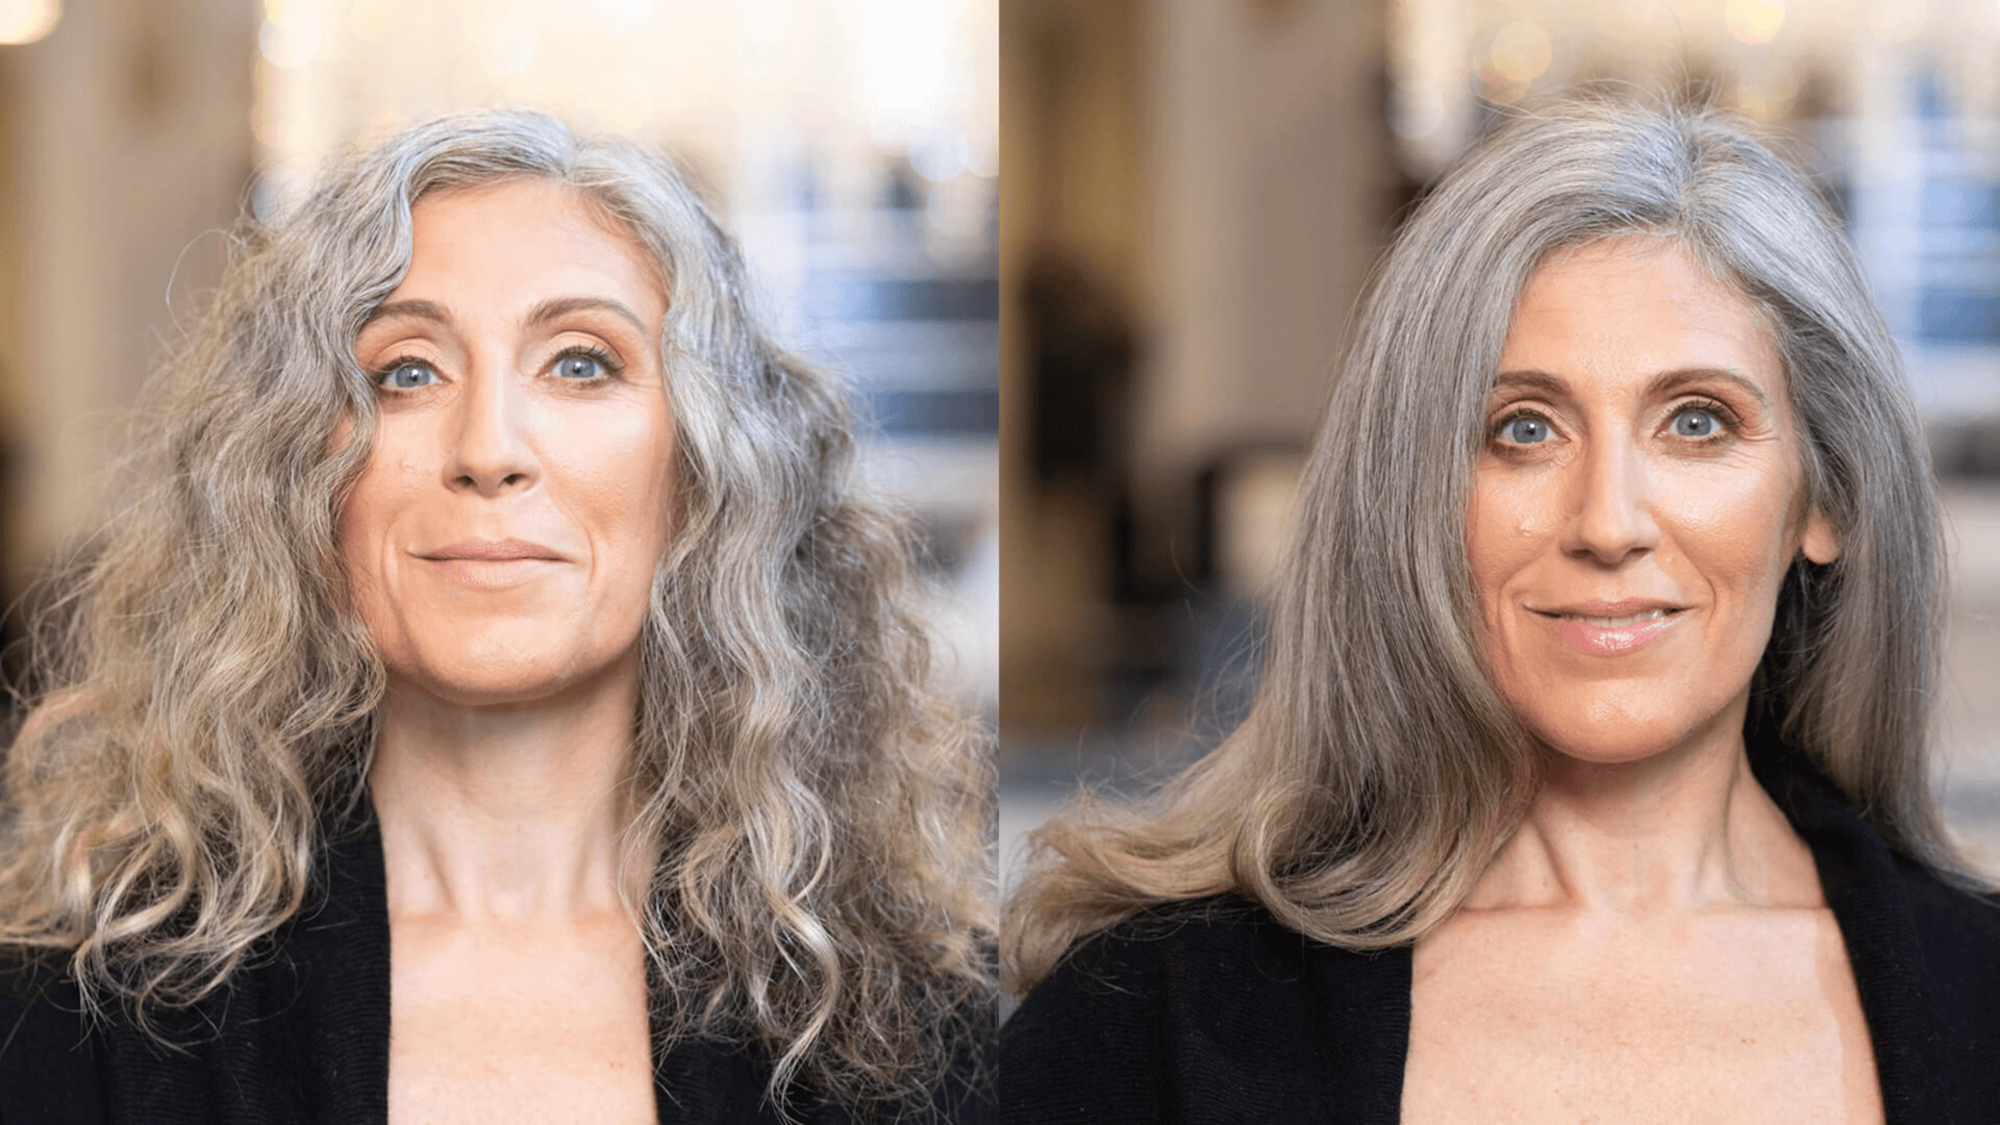 Gray Blending: How to Transition Clients to Dimensional Silver Hair